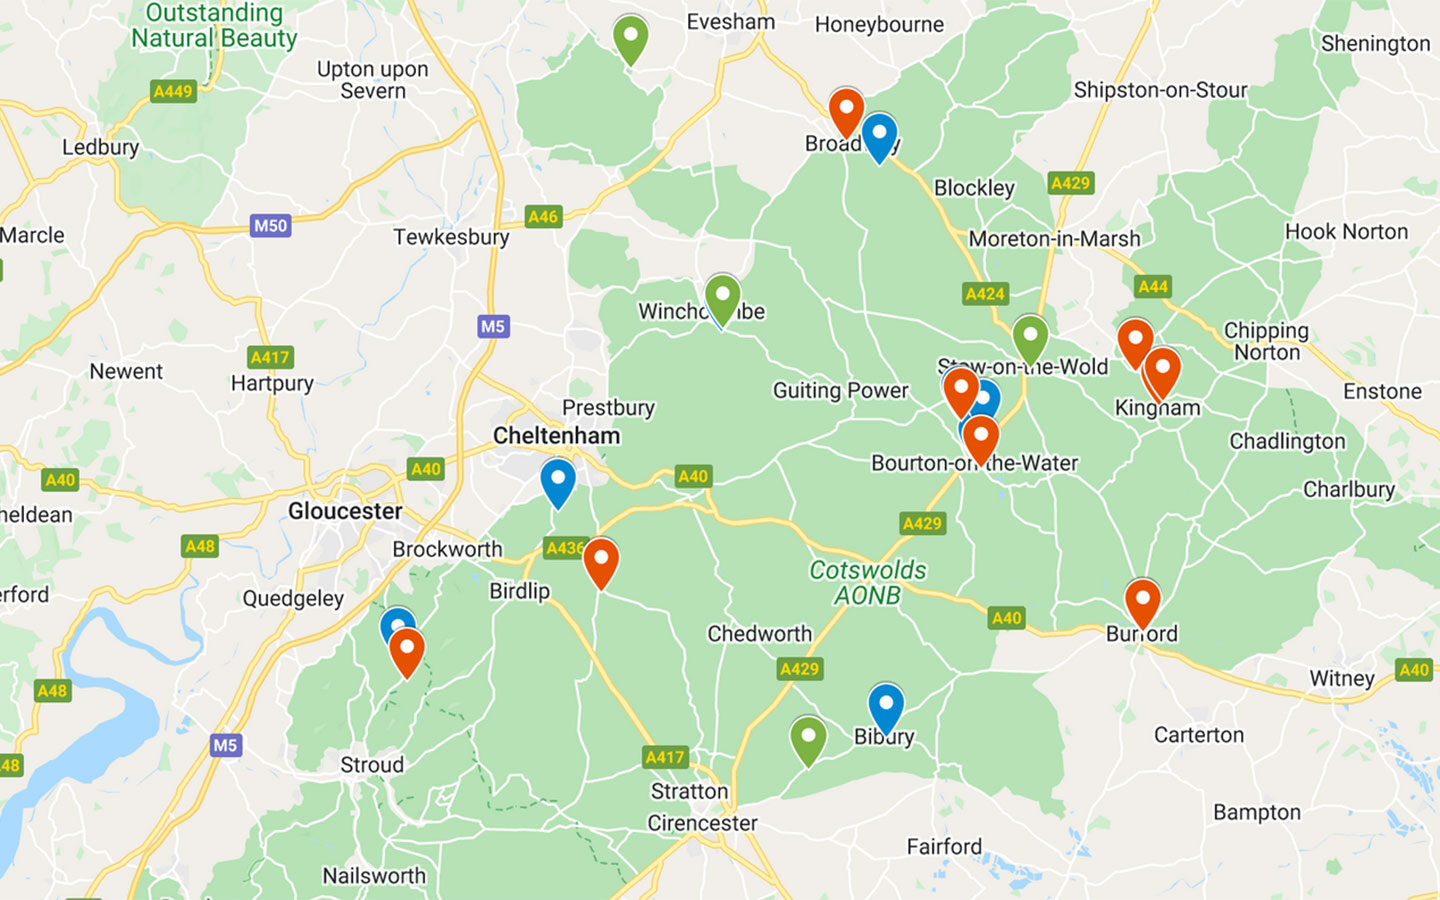 Map of things to do in the Cotswolds